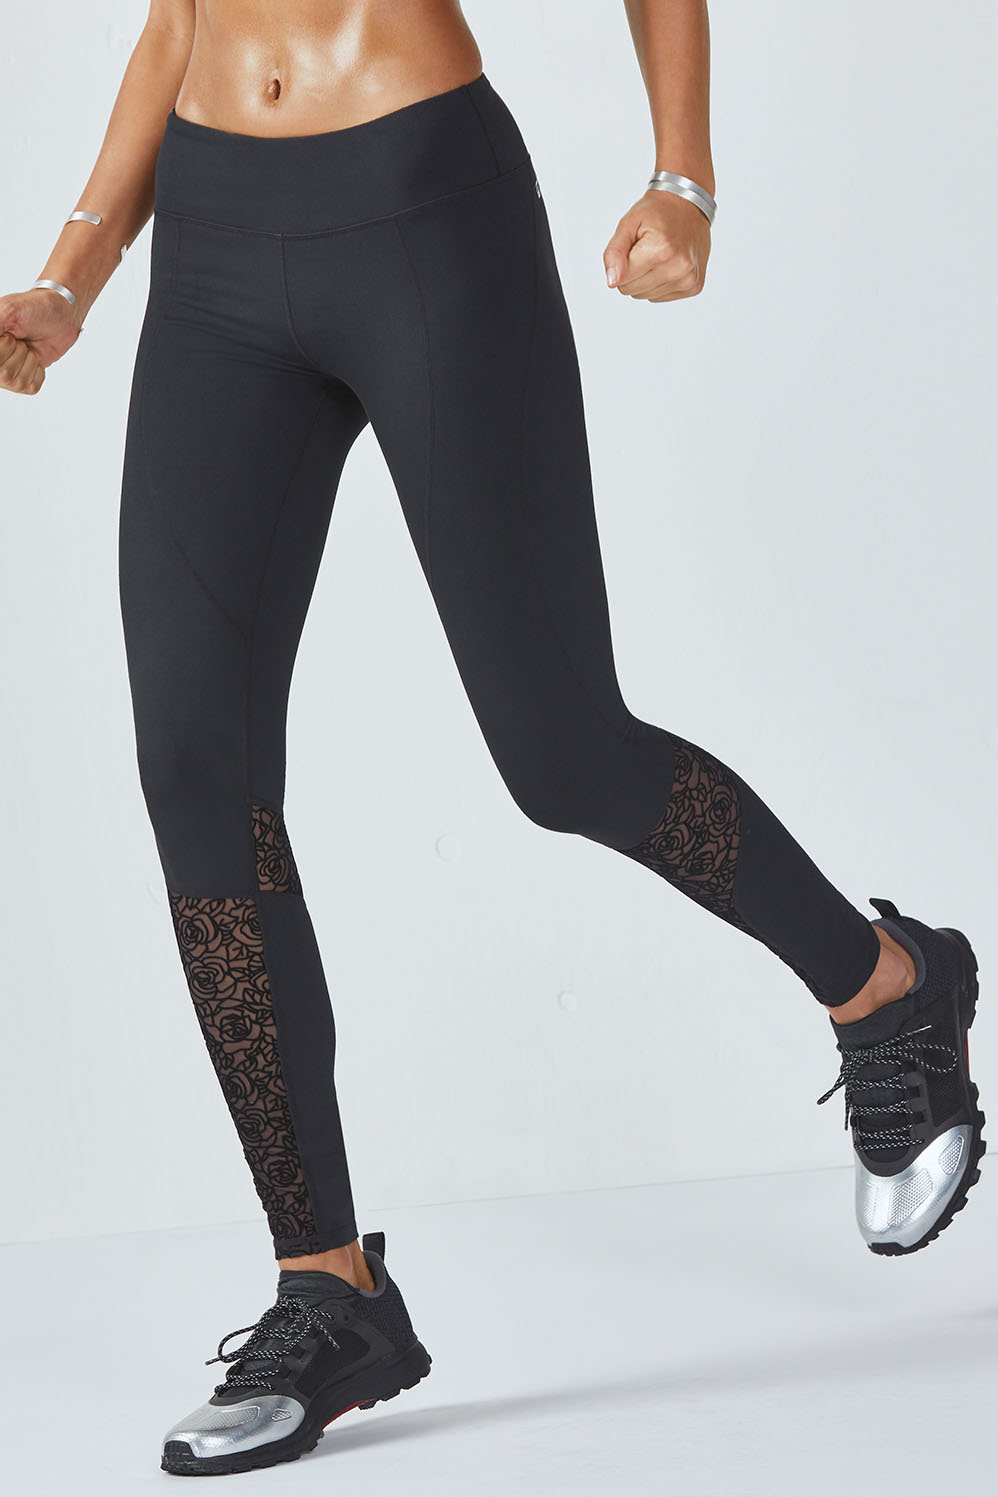 FABLETICS STRETCH BLACK LEGGINGS SIZE SMALL mesh workout pants athletic